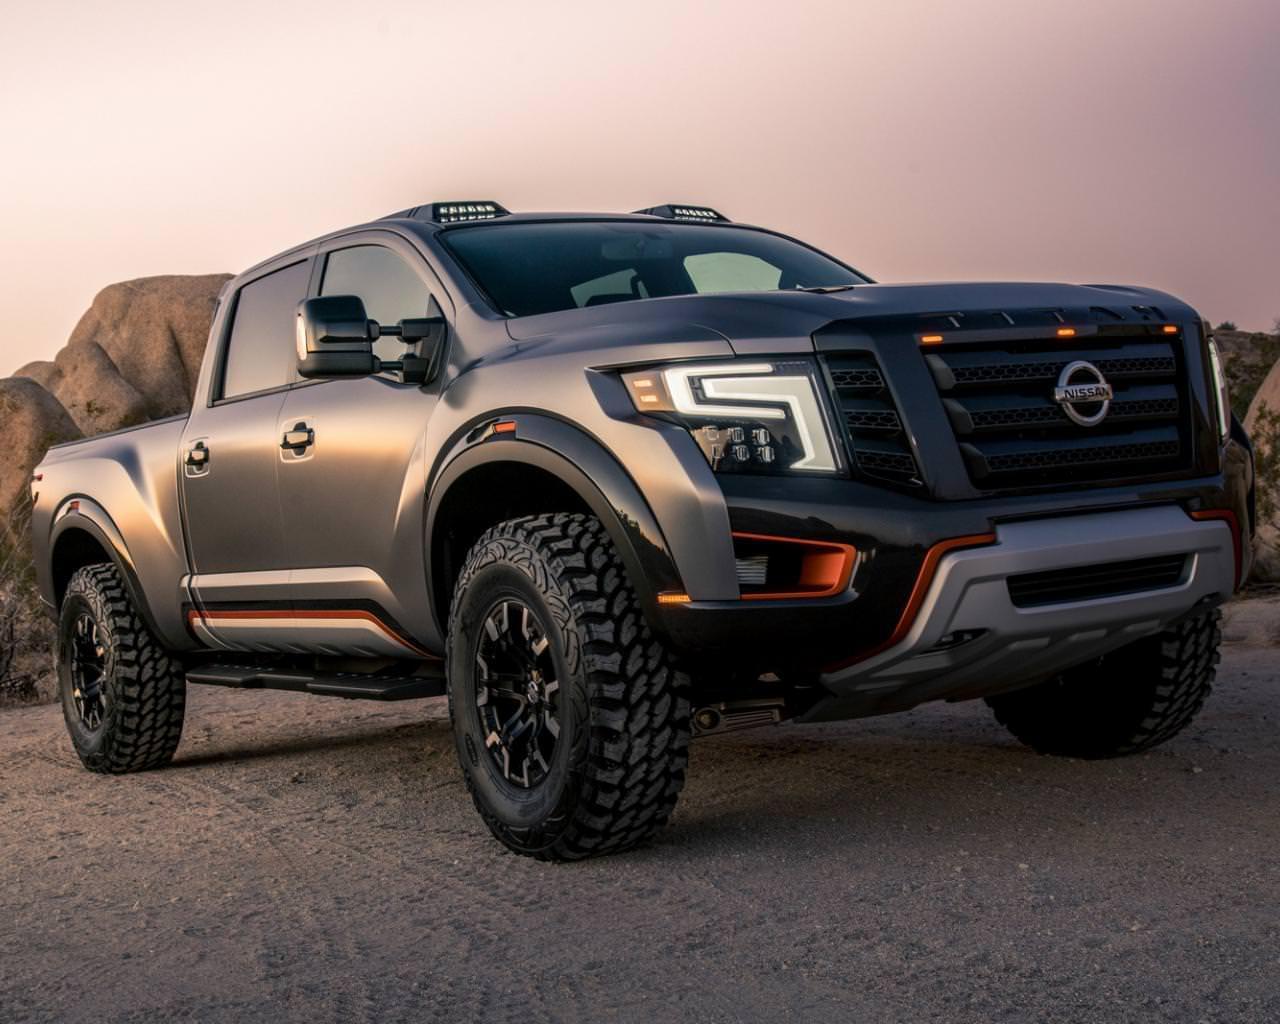 Nissan Titan Wallpaper Pickup Truck For Android